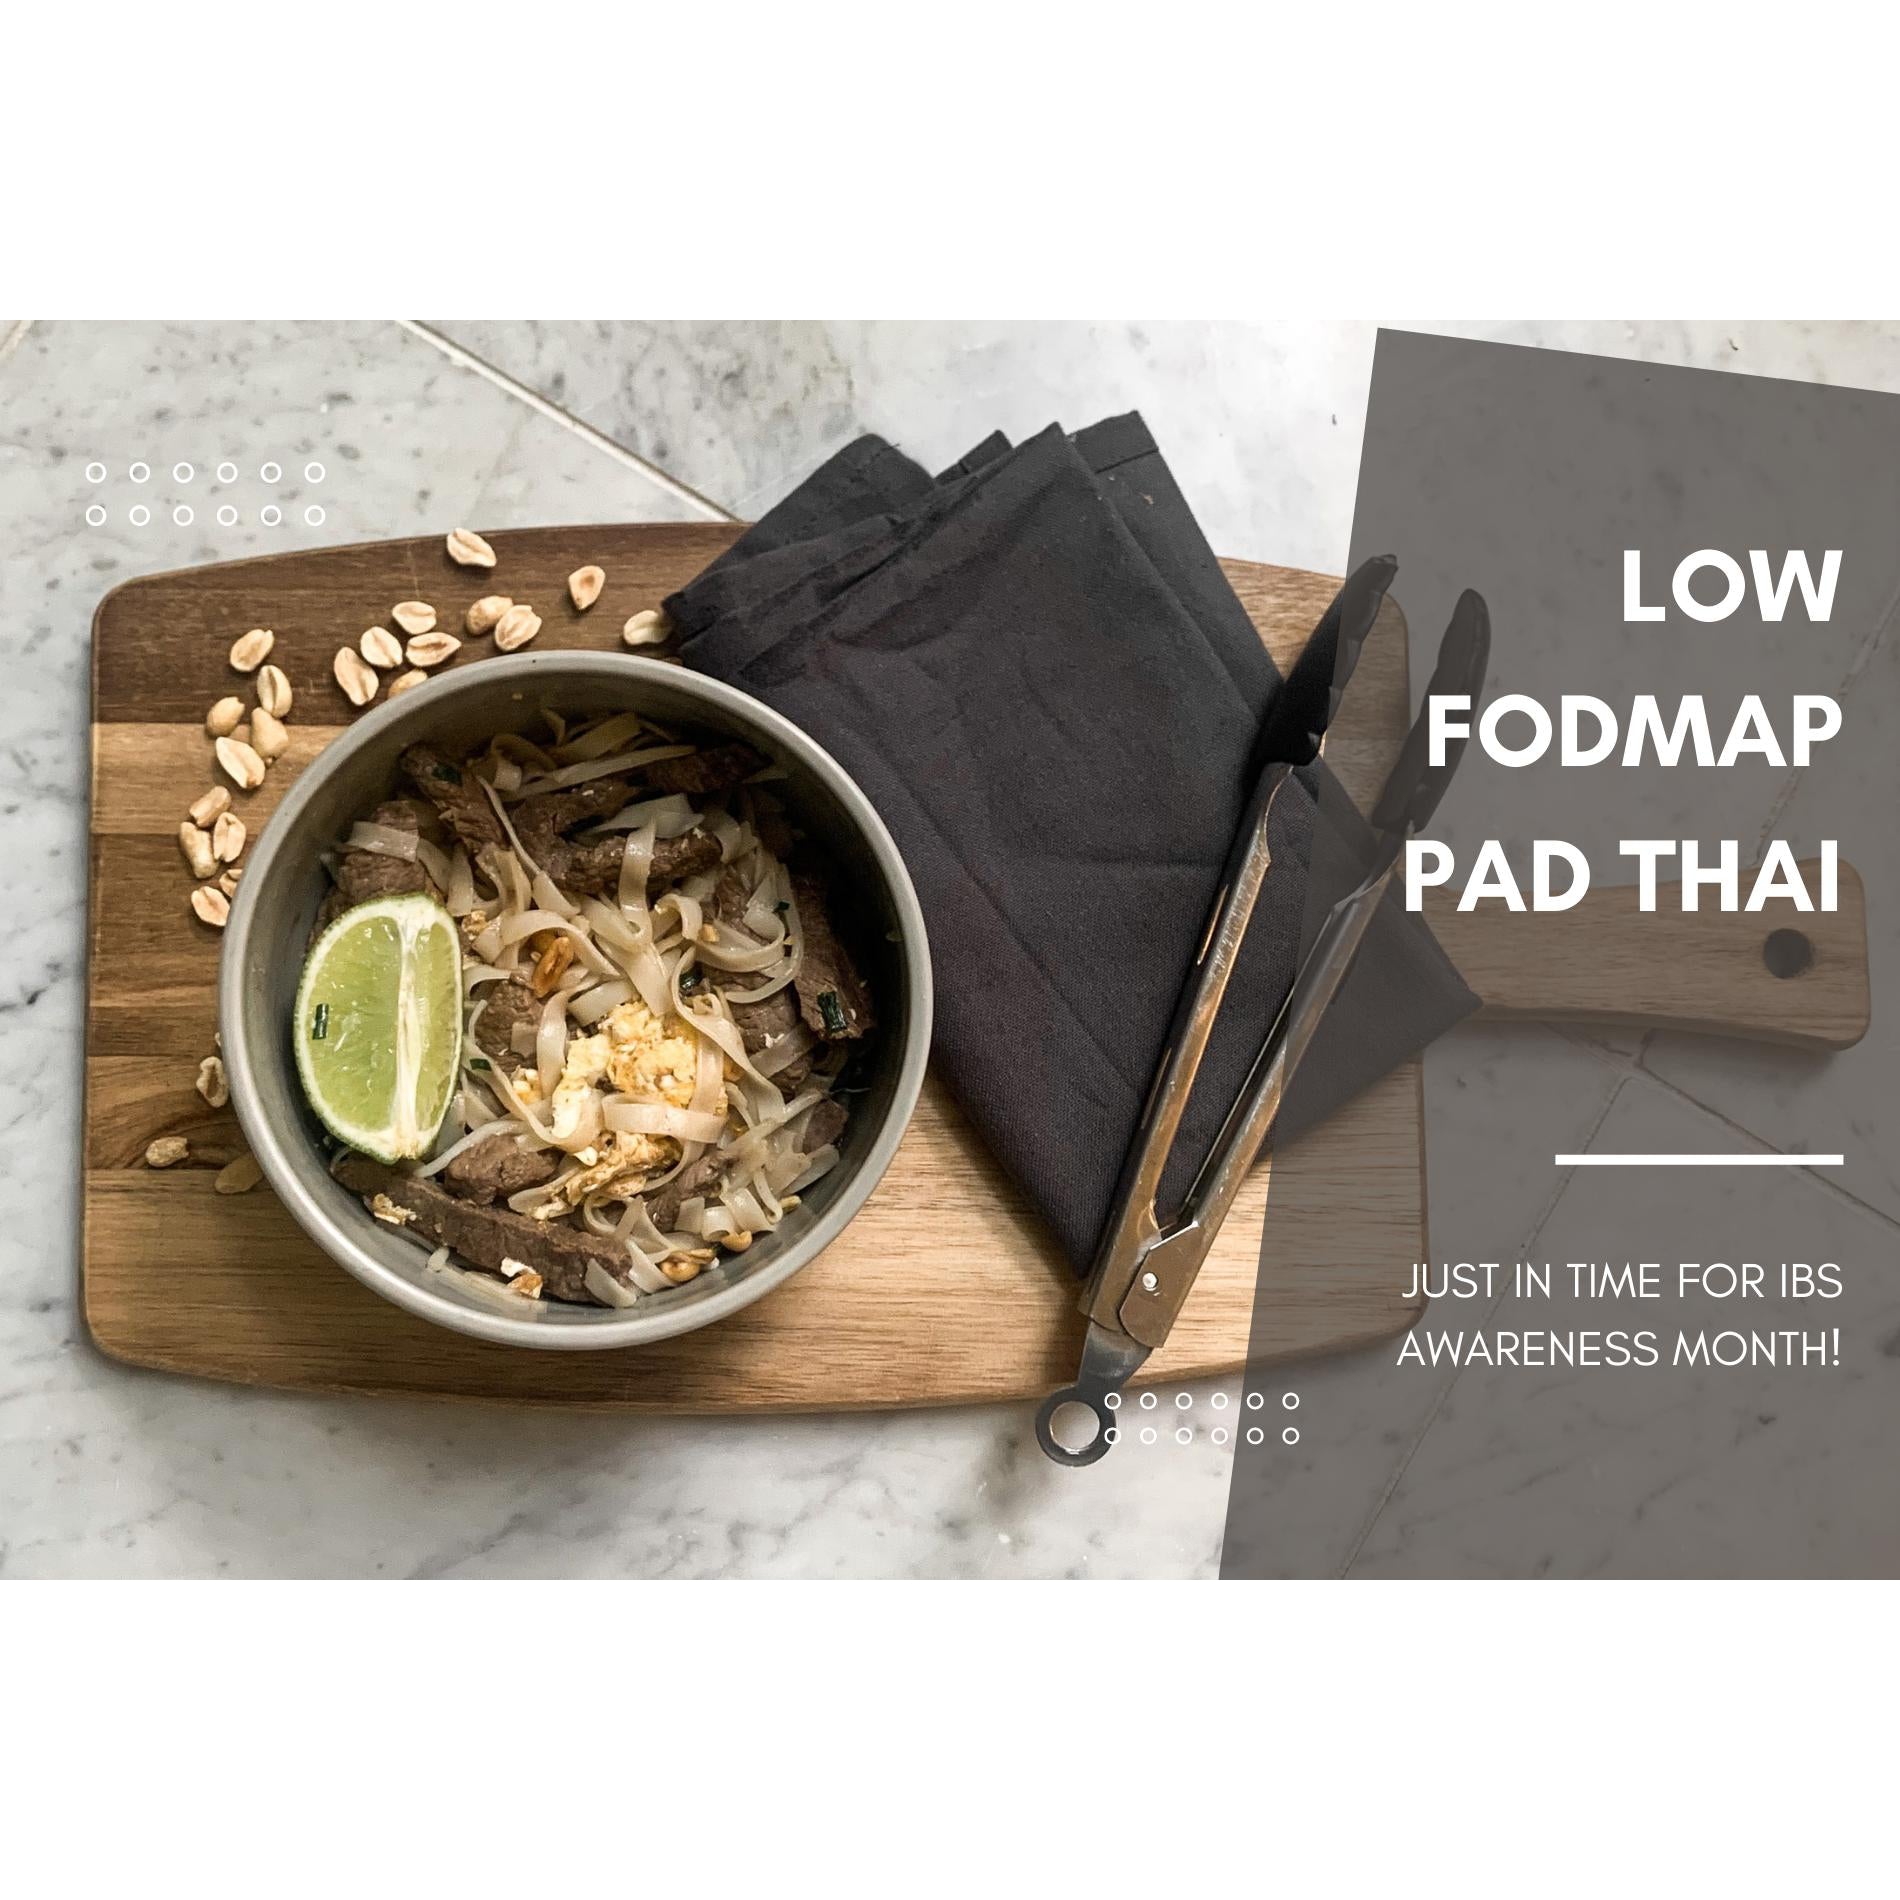 Low FODMAP Pad Thai - Just in time for IBS Awareness Month!